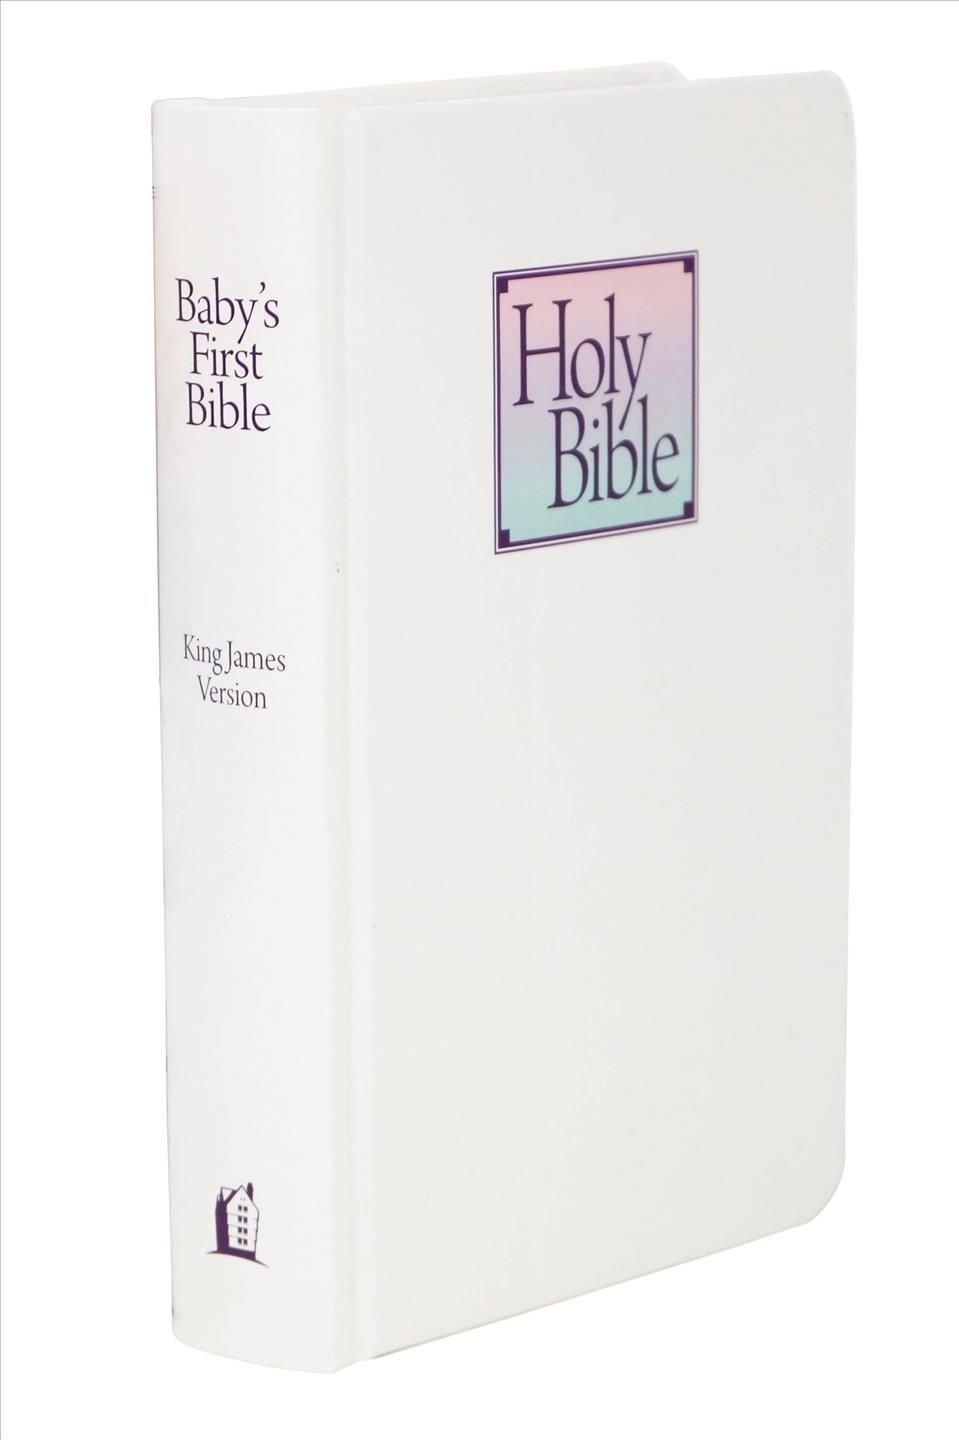 KJV, Baby's First Bible, Hardcover, Multicolor